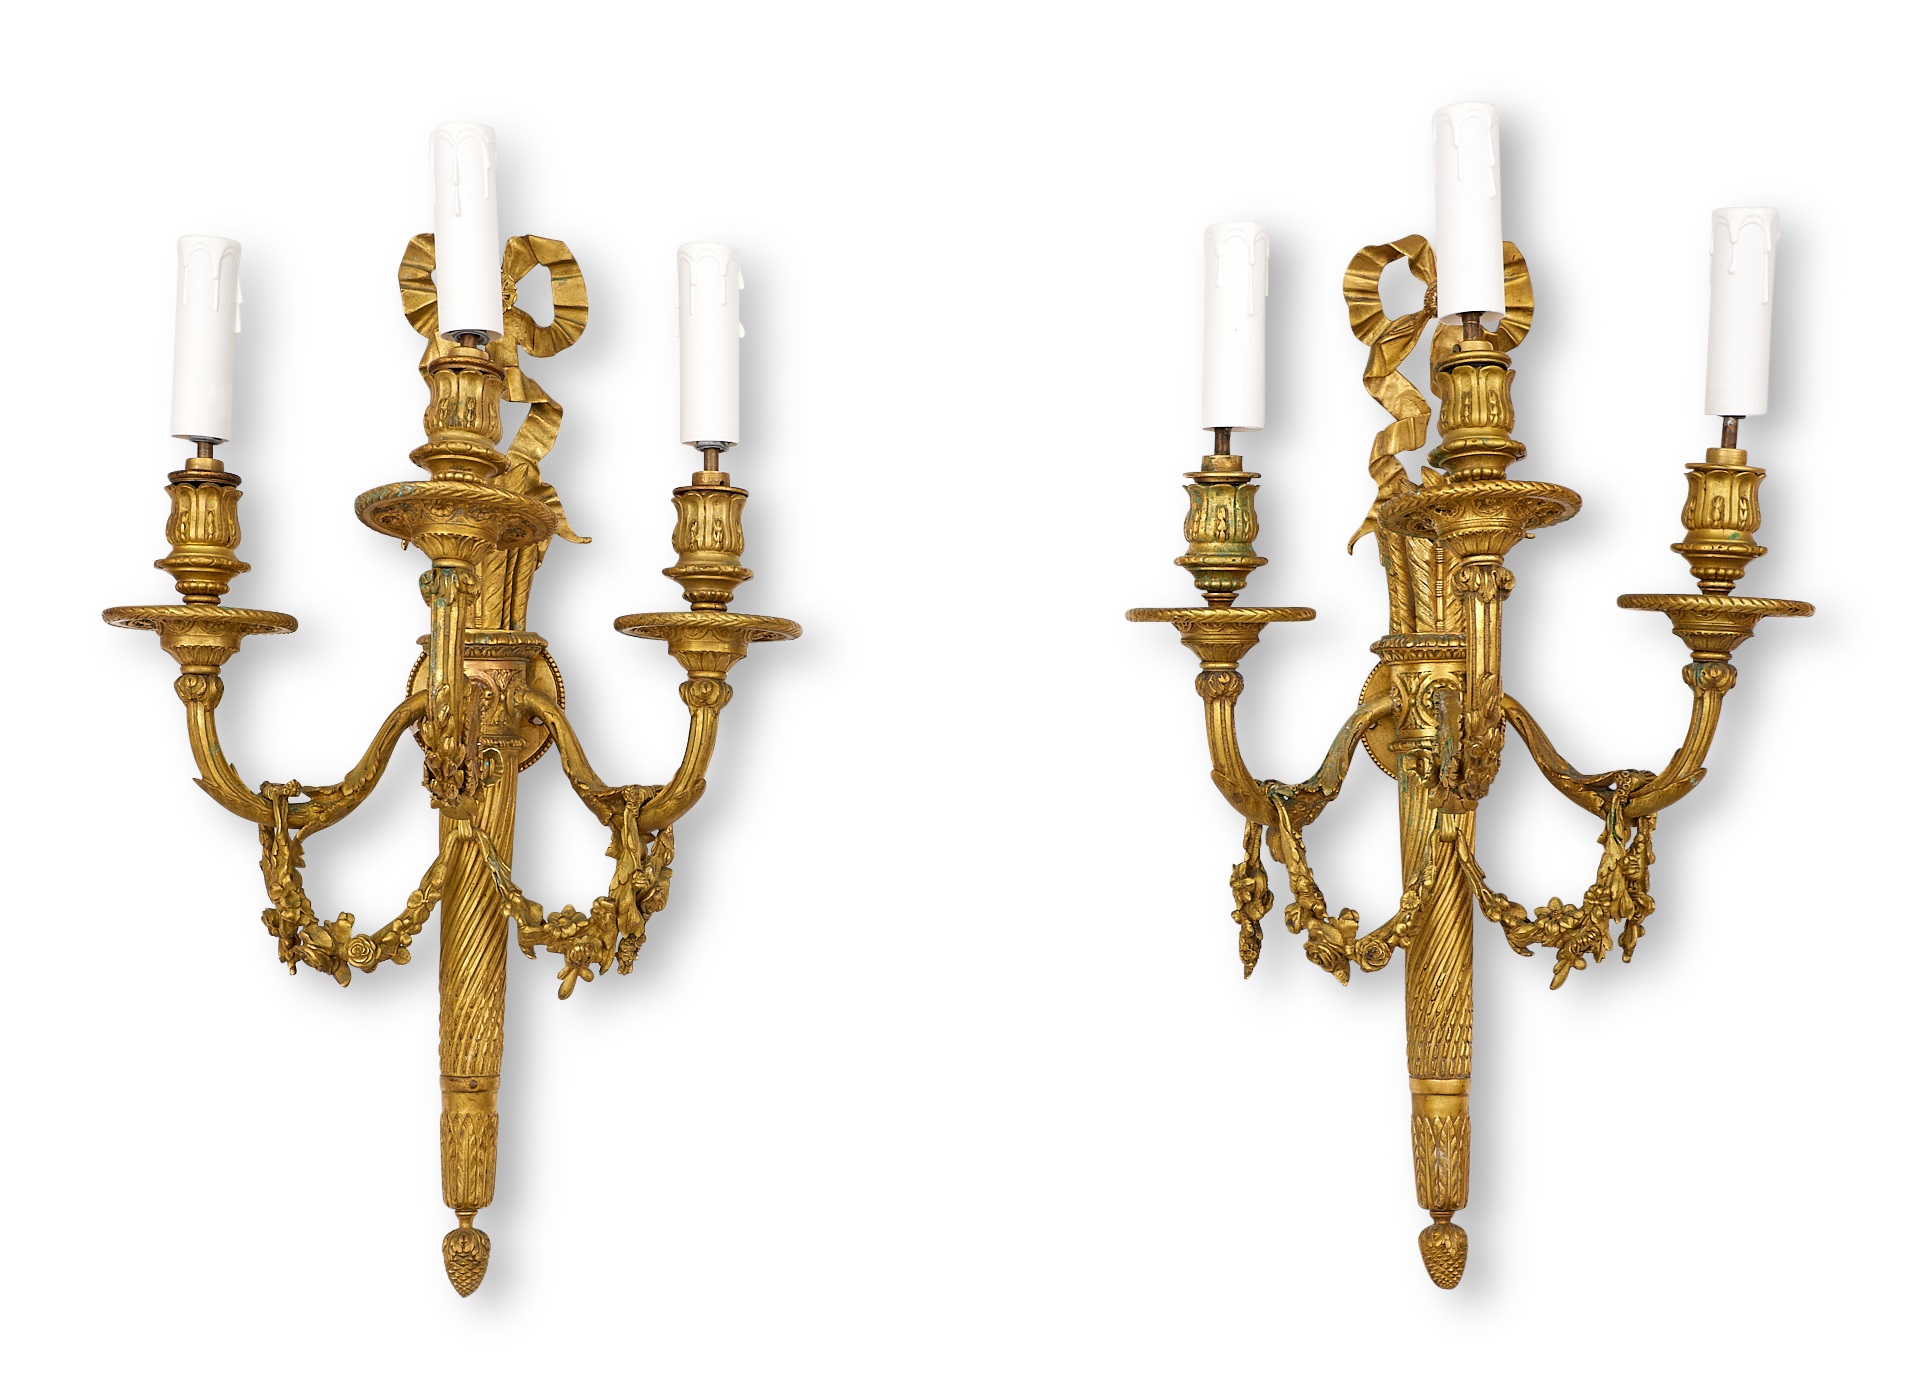 A PAIR OF EARLY 20TH CENTURY FRENCH GILT BRONZE LOUIS XVI STYLE WALL LIGHTS